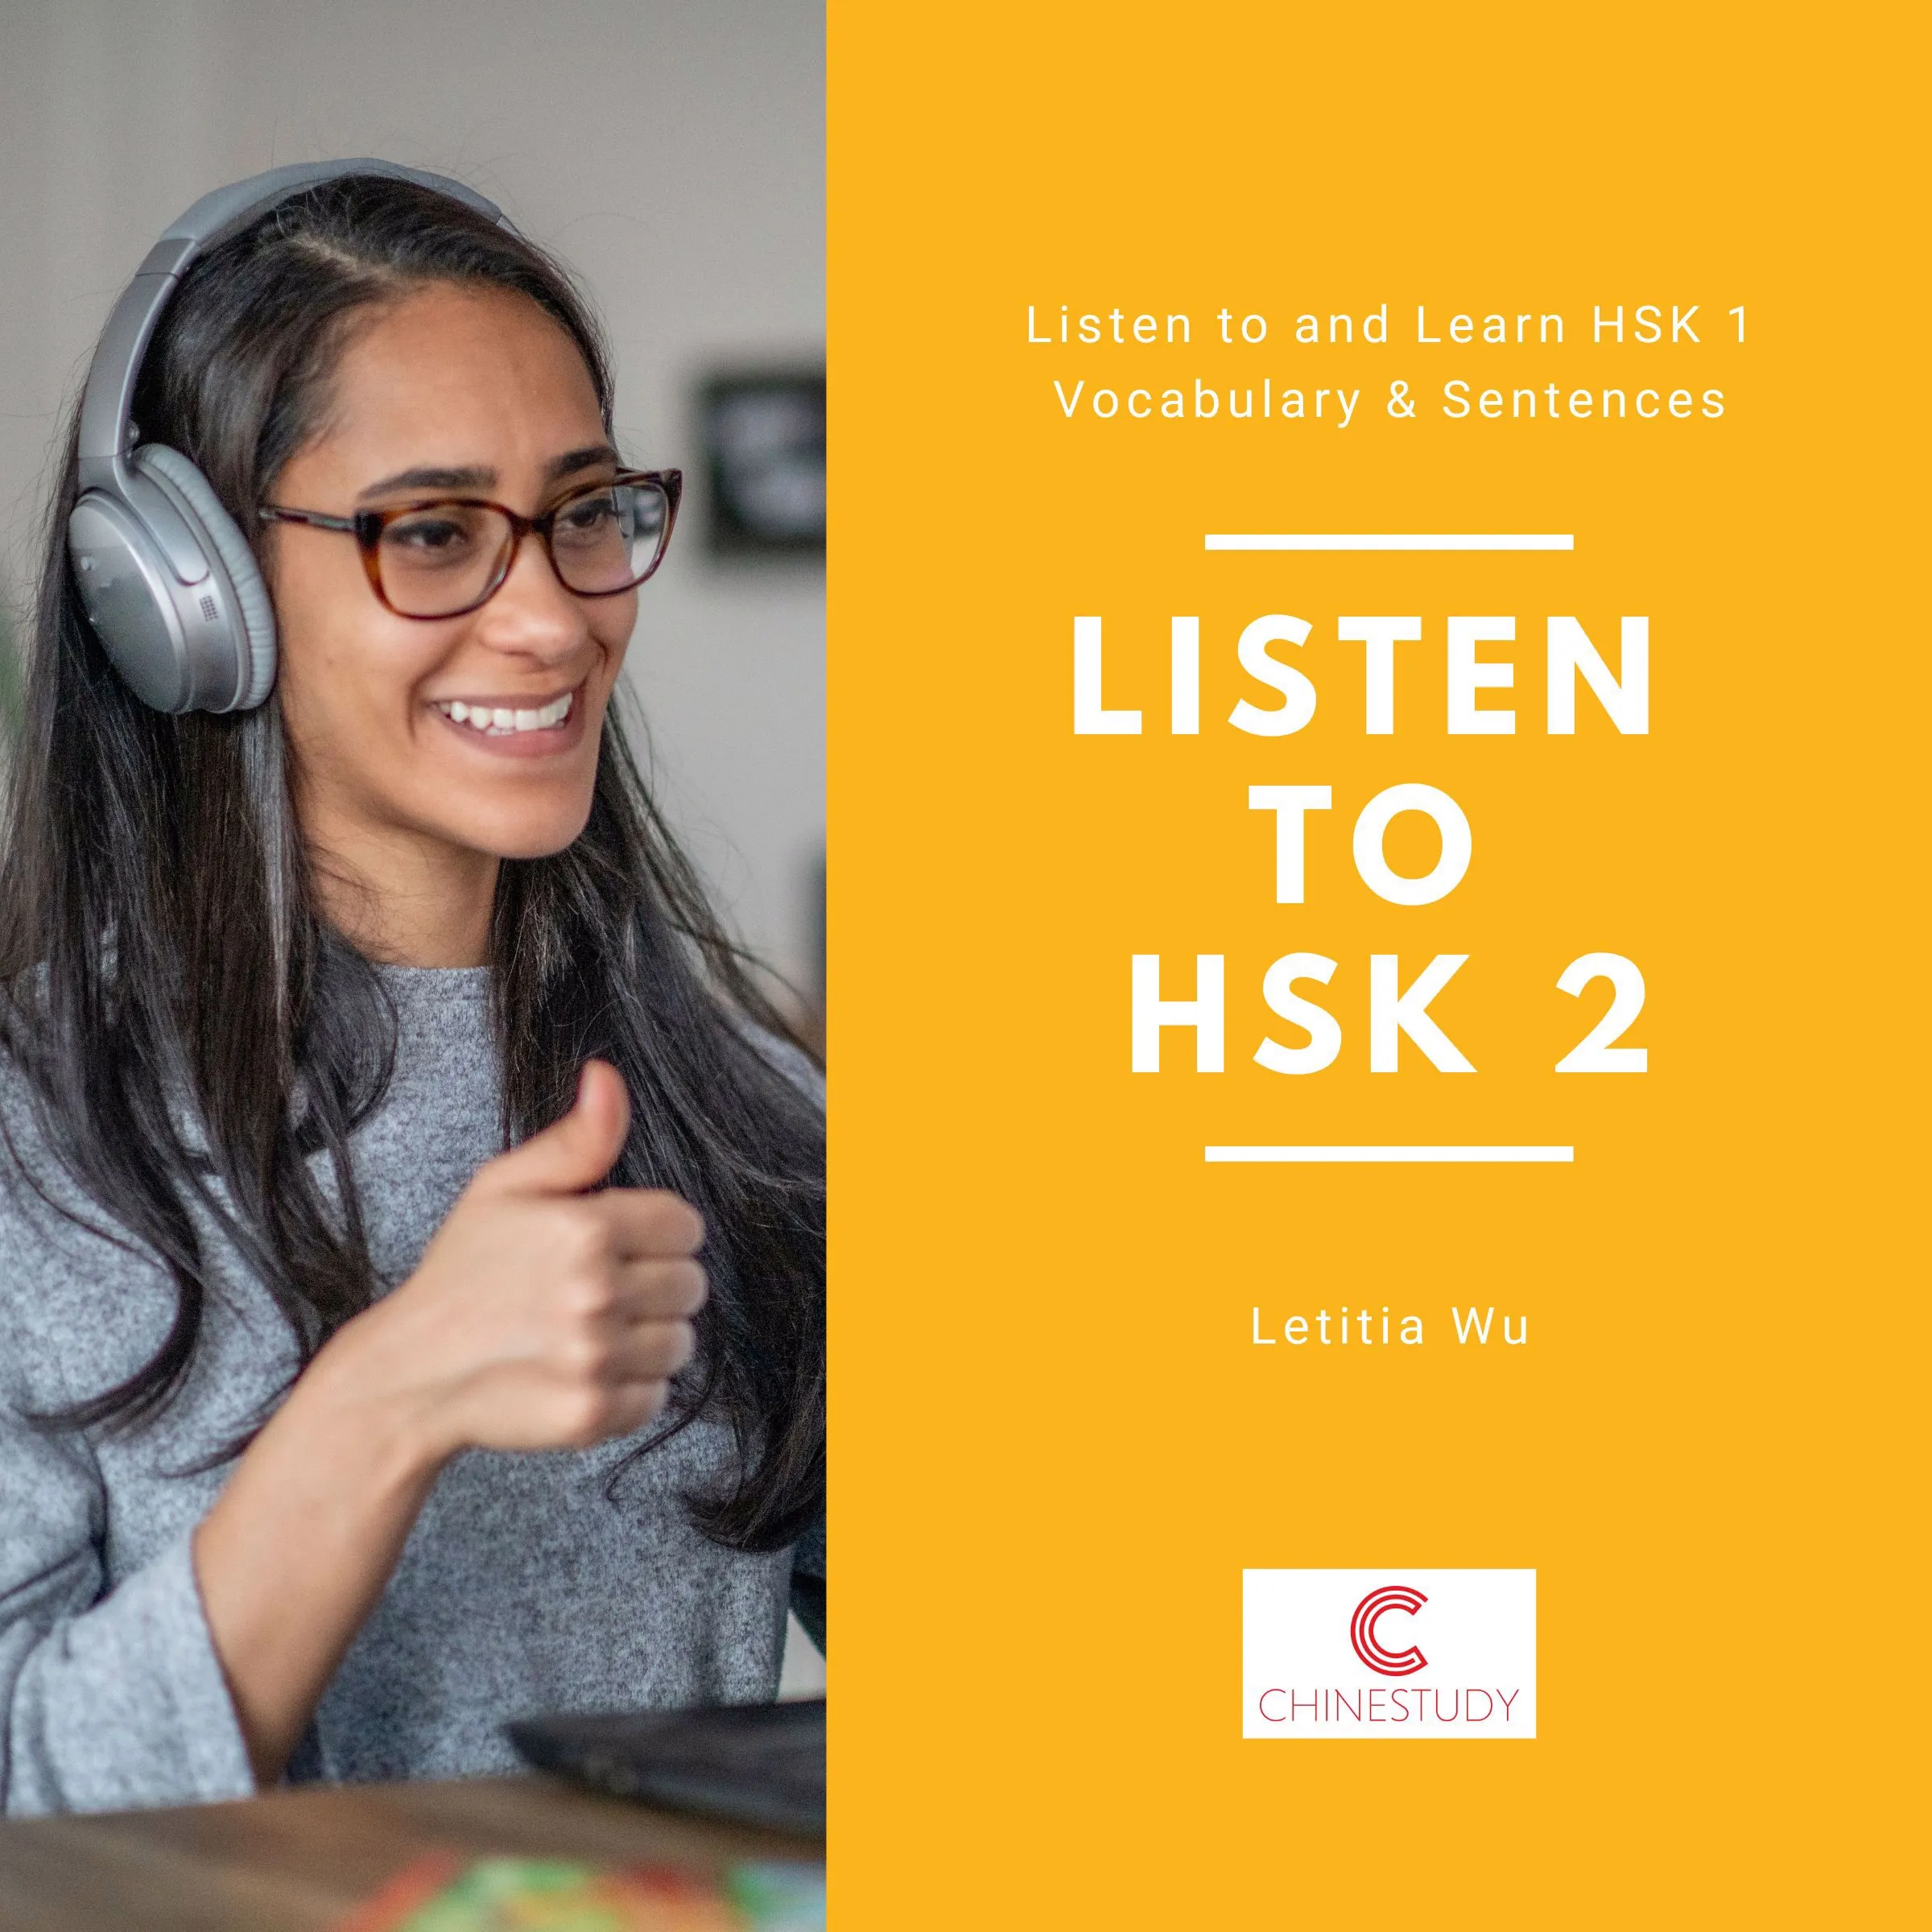 Listen to HSK2 Audiobook by Letitia Wu